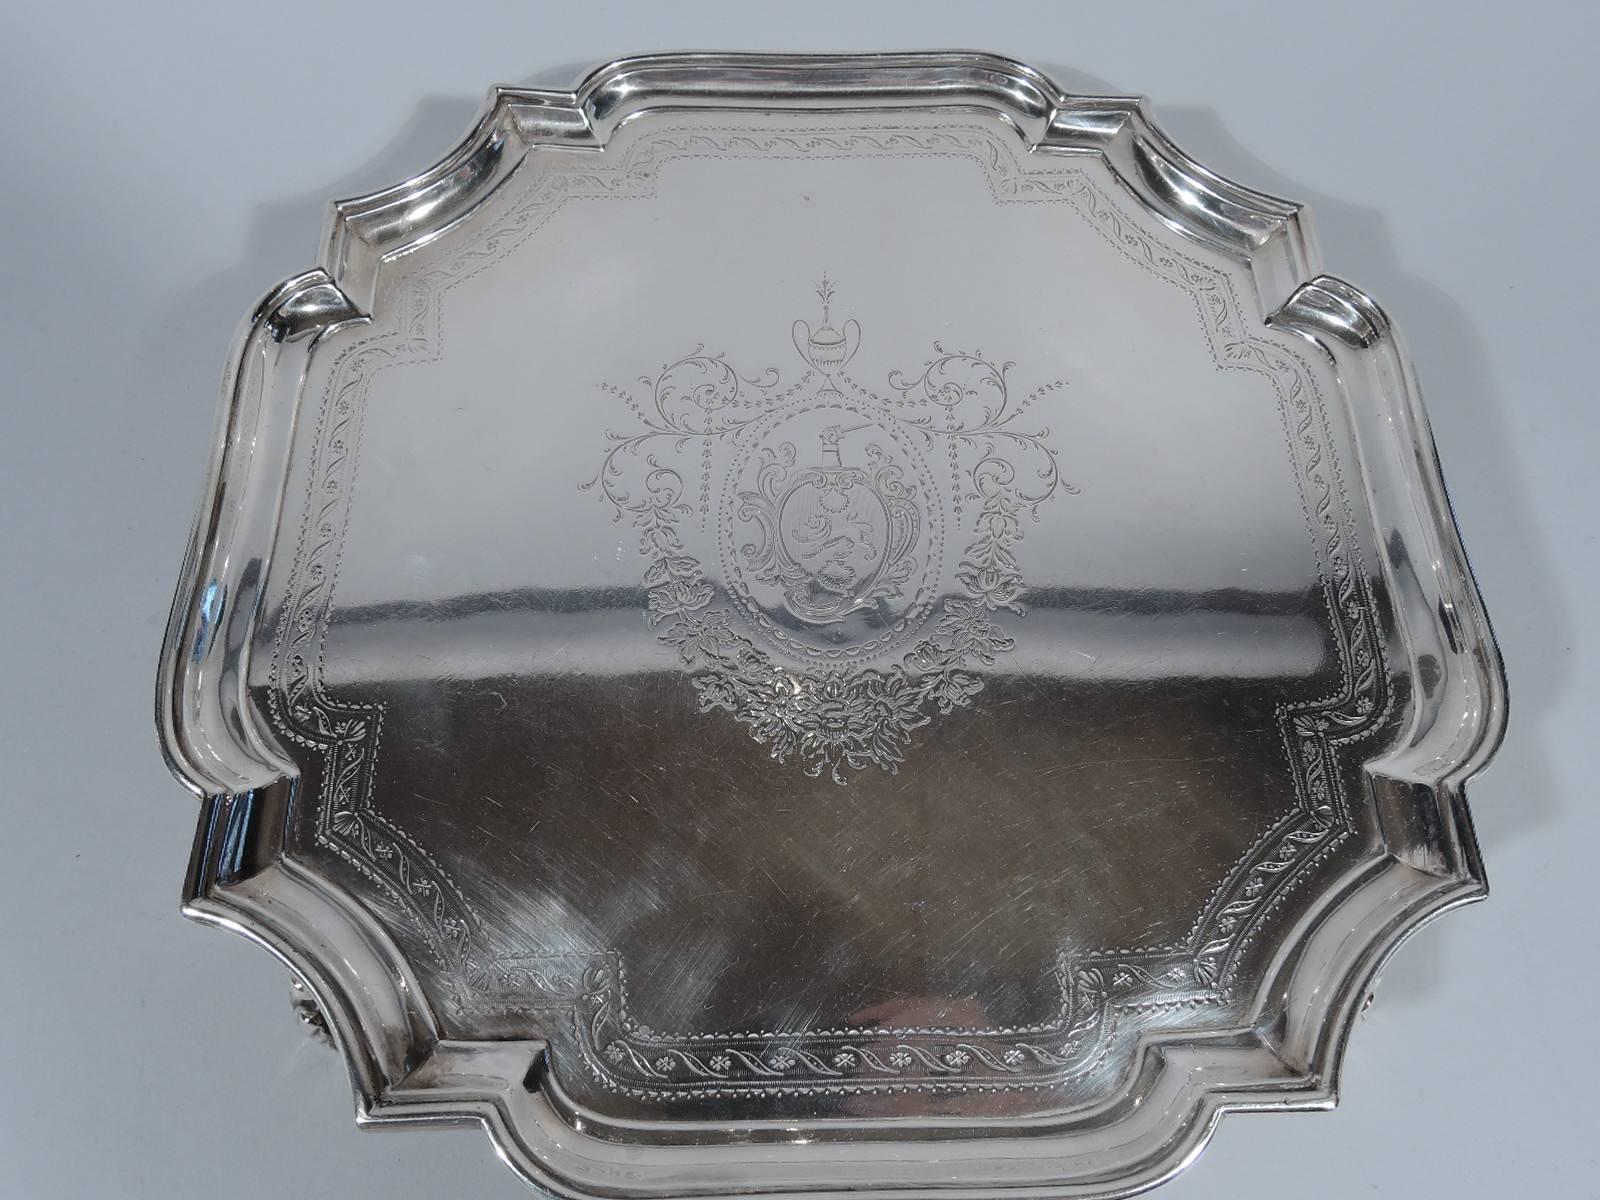 George II sterling silver salver. Made by John Tuite in London in 1727. Four-sided cartouche with concave corners and molded rim. Four leaf-capped volute scroll supports. Well has engraved central armorial with Amphora and garland as well as